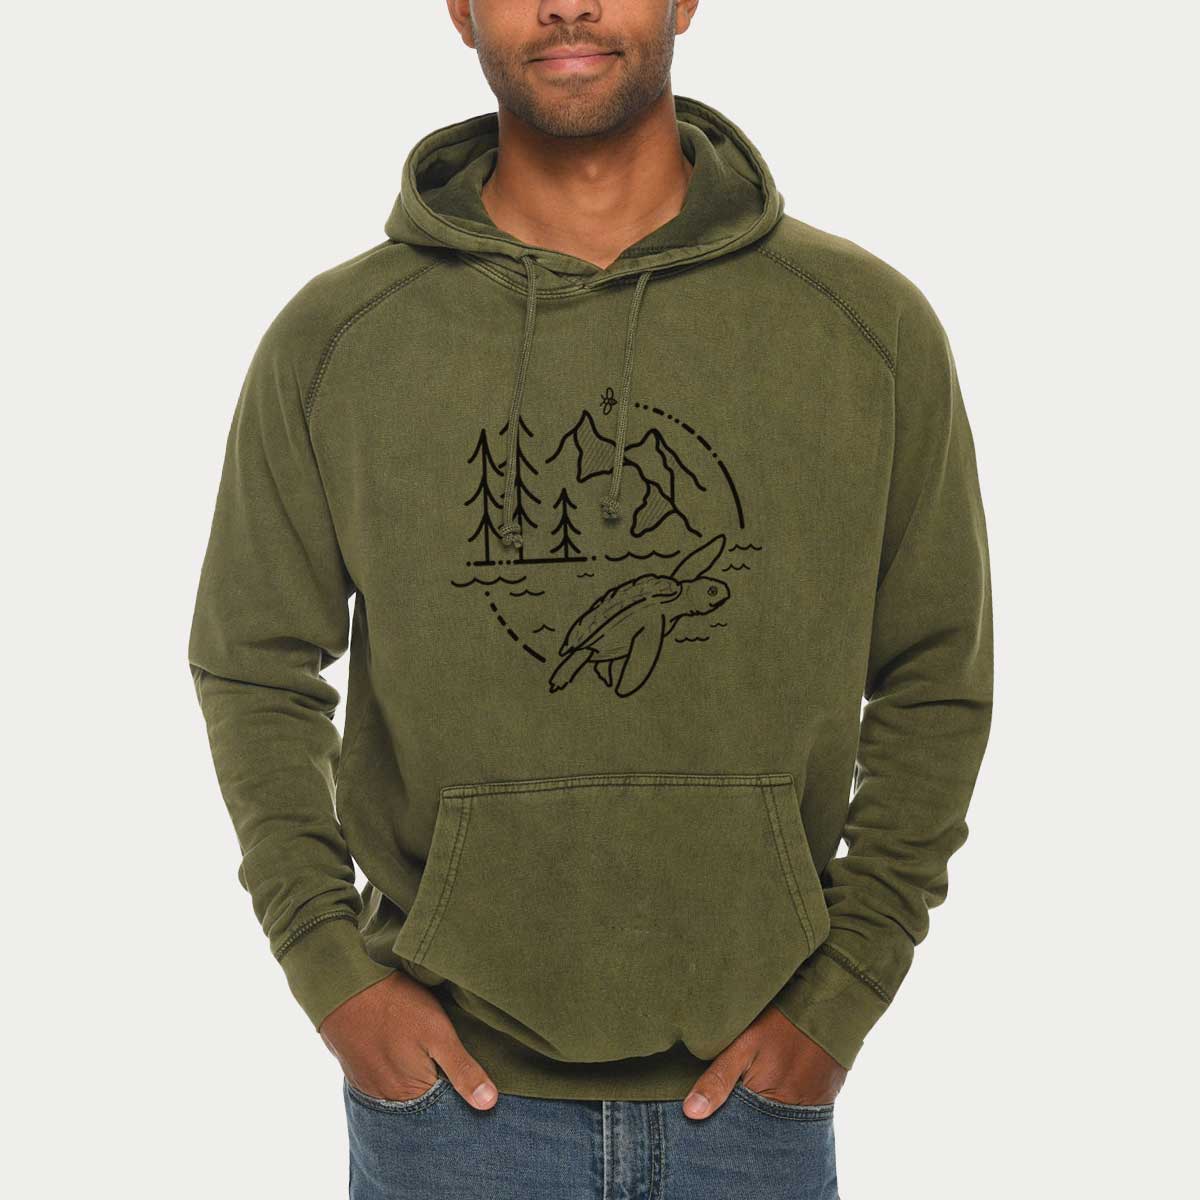 It&#39;s All Connected - Kemps Ridley Turtle  - Mid-Weight Unisex Vintage 100% Cotton Hoodie